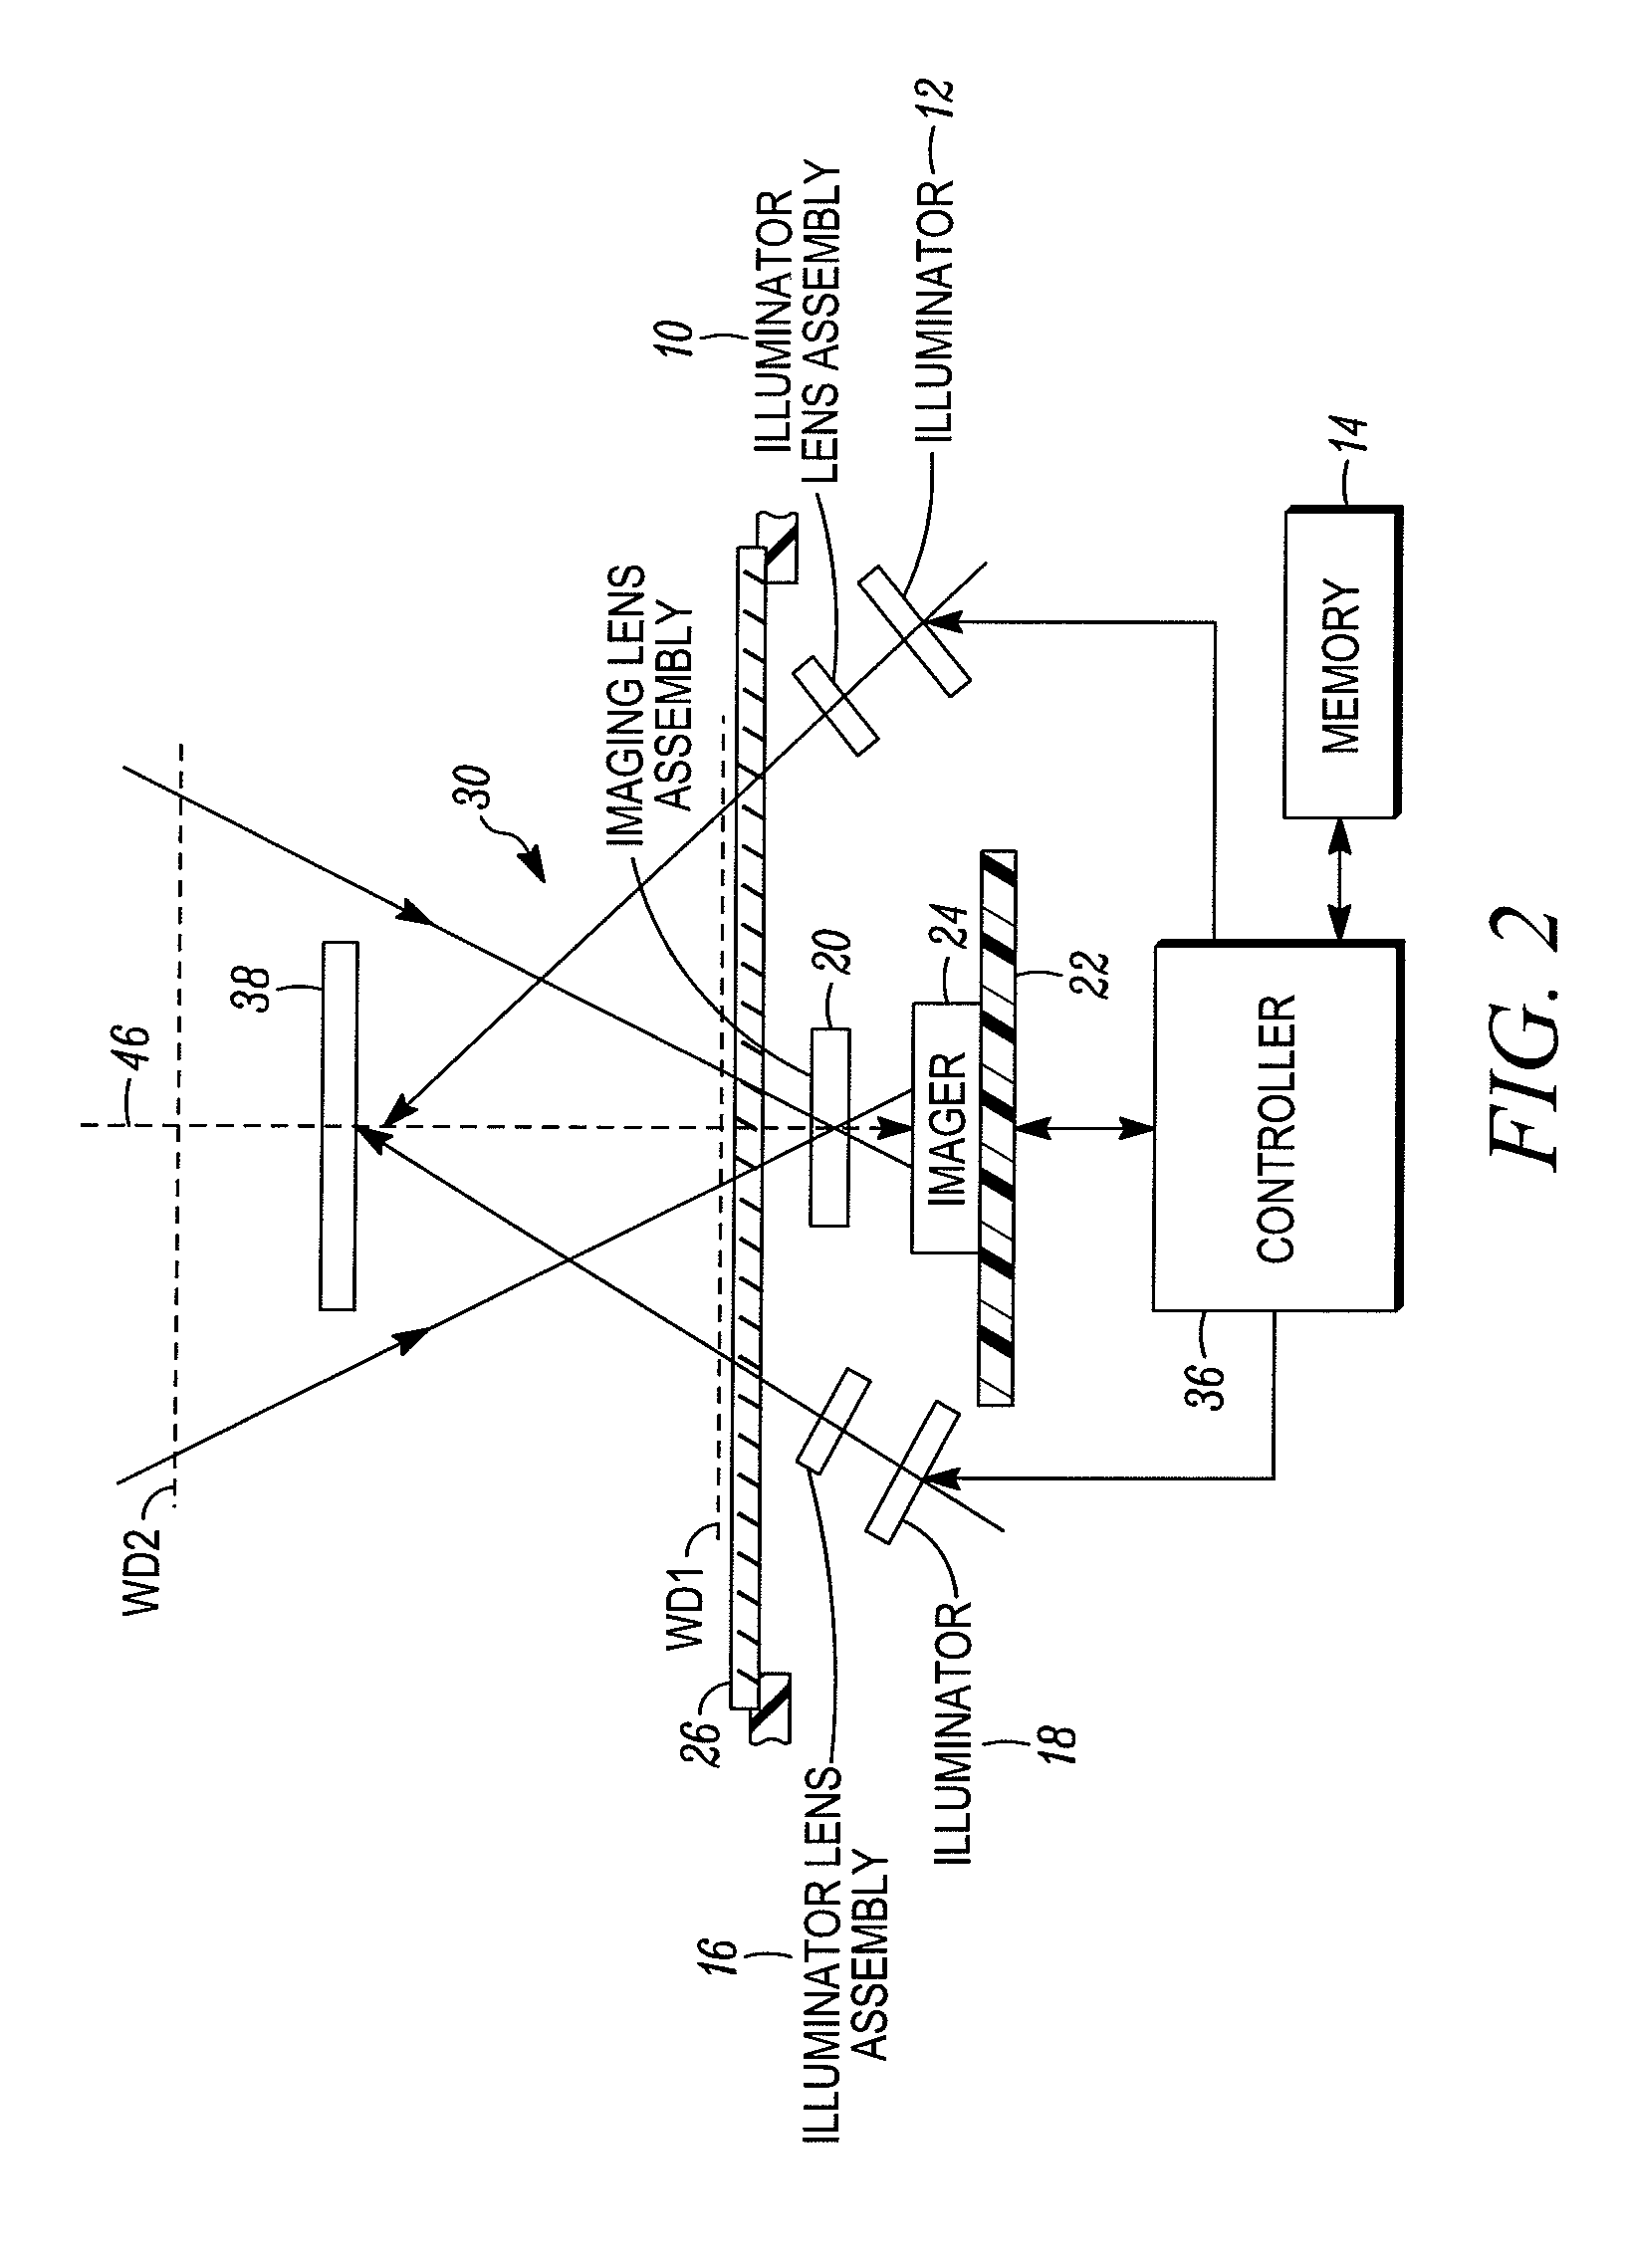 Imaging reader for electro-optically reading two-dimensional symbols with controller having limited internal memory